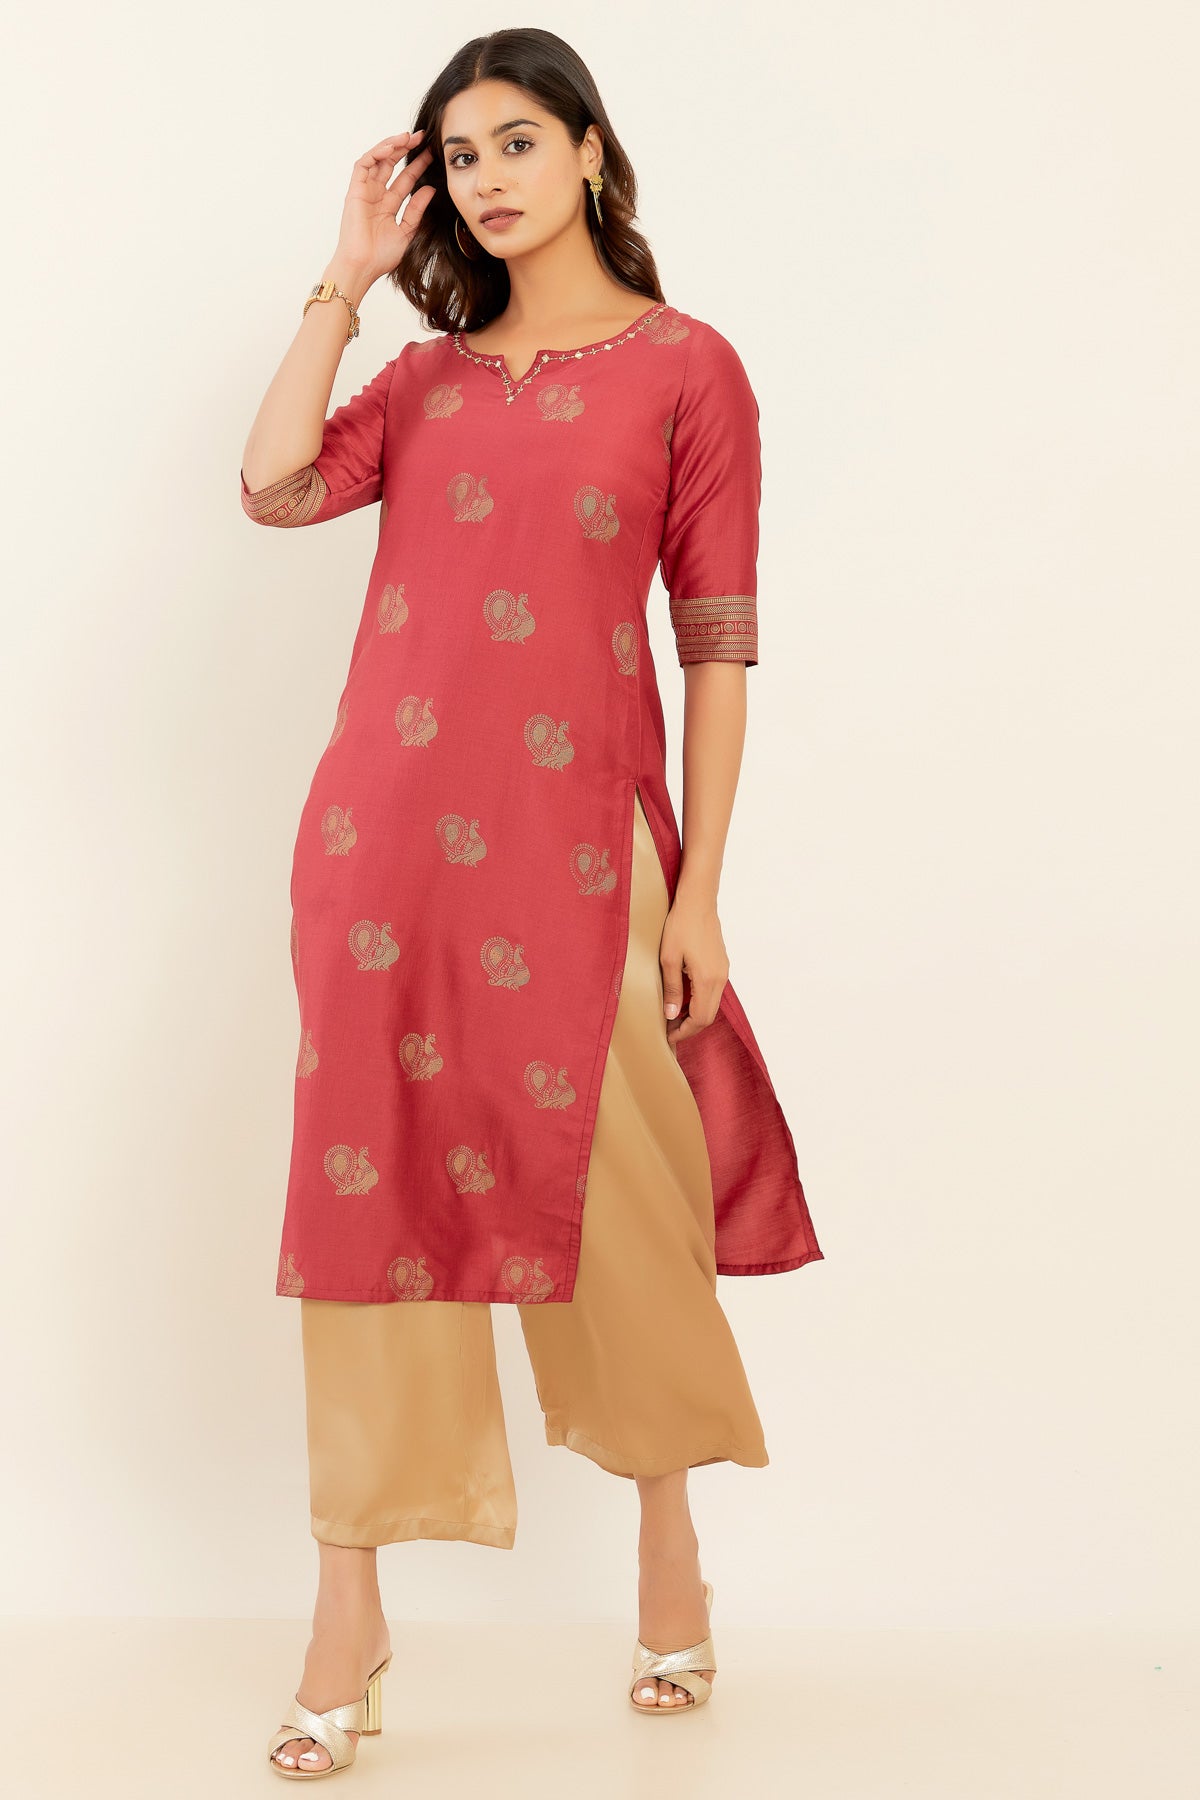 All Over Annam Printed With Embellished Foil Mirror Work Neckline Kurta - Pink